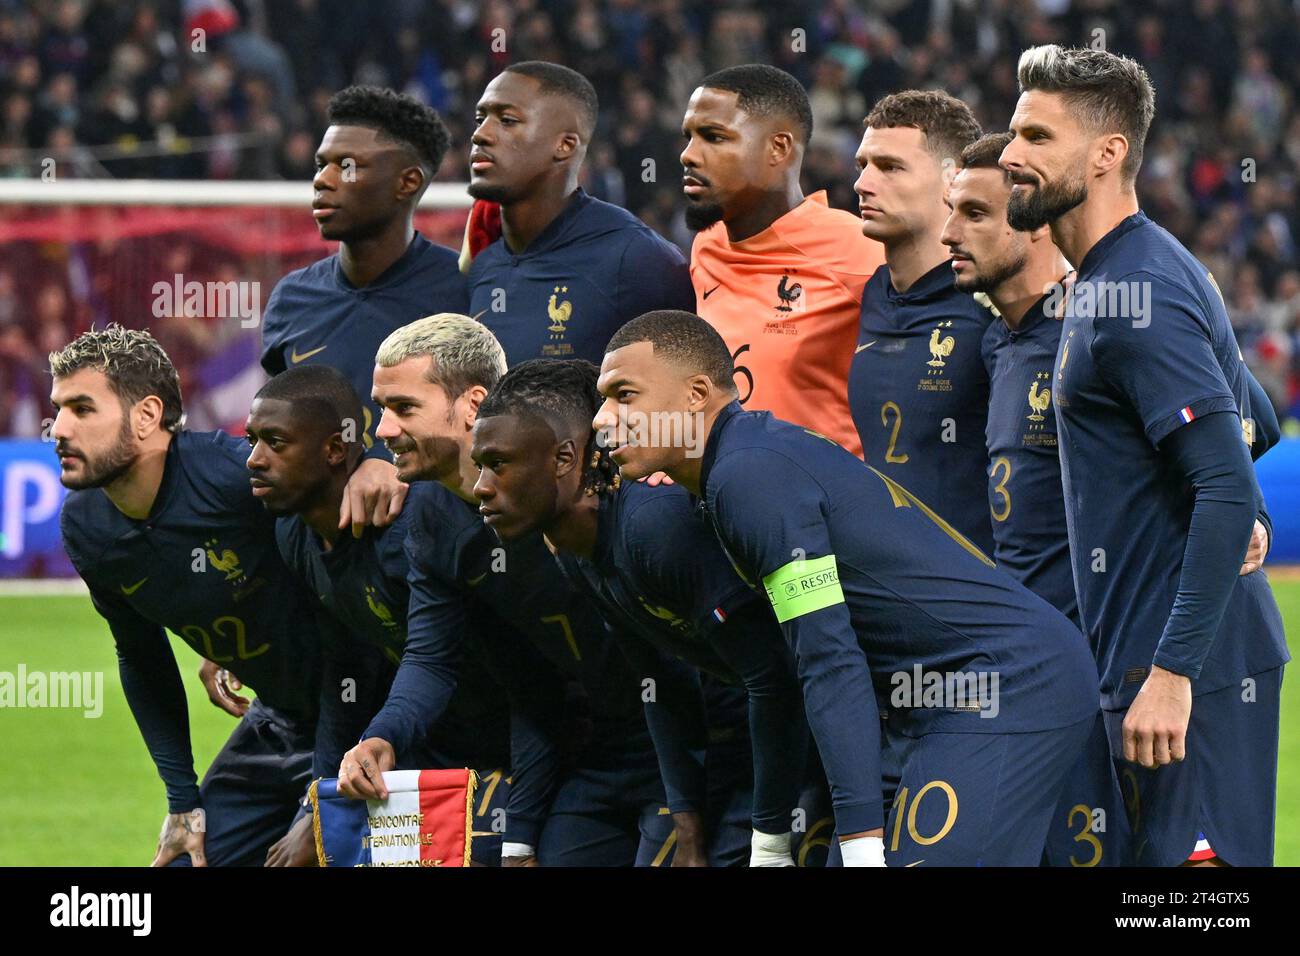 players of France with Aurelien Tchouameni (8) of France, Ibrahima Konate (13) of France, Goalkeeper Mike Maignan (16) of France, Benjamin Pavard (2) of France, Jonathan Clauss (3) of France, Olivier Giroud (9) of France, Theo Hernandez (22) of France, Ousmane Dembele (11) of France, Antoine Griezmann (7) of France, Eduardo Camavinga (6) of France and Kylian Mbappe (10) of France pose for a team photo during a soccer game between the national teams of France and Scotland in friendly game, on October 17, 2023 in Lille, France. (Photo by David Catry/Sportpix) Stock Photo